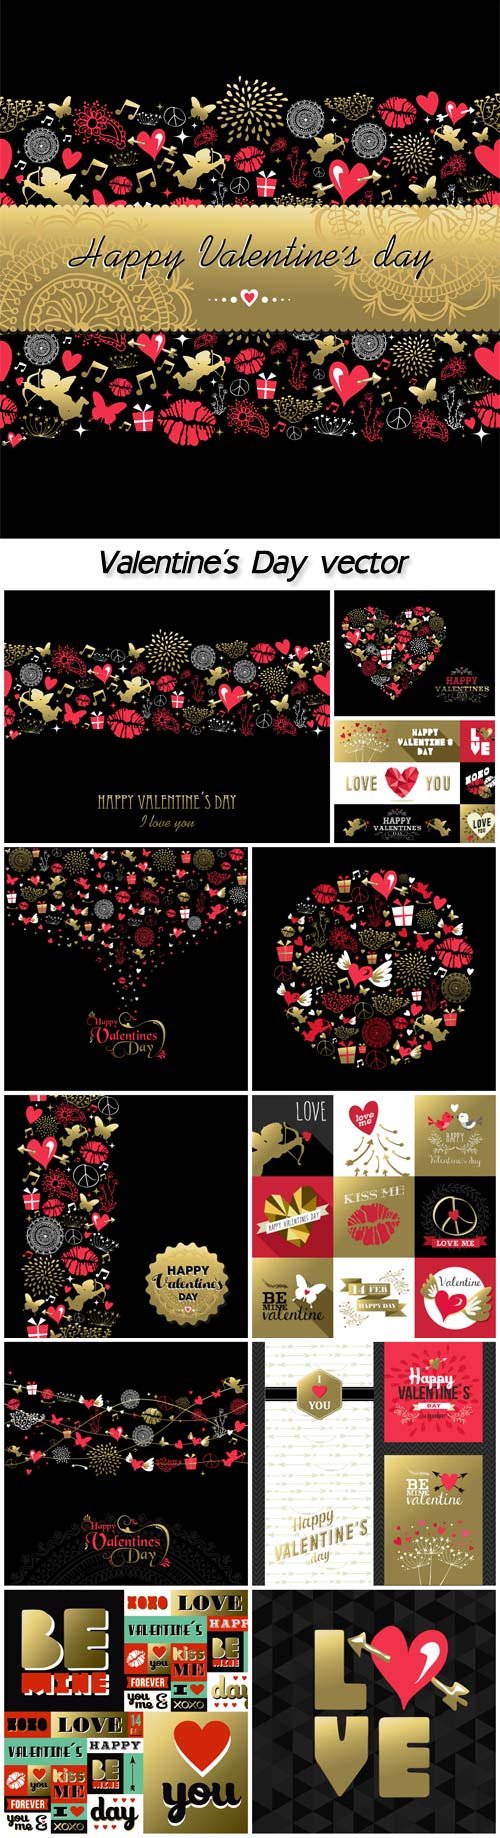 Valentine's Day Hearts Love Backgrounds